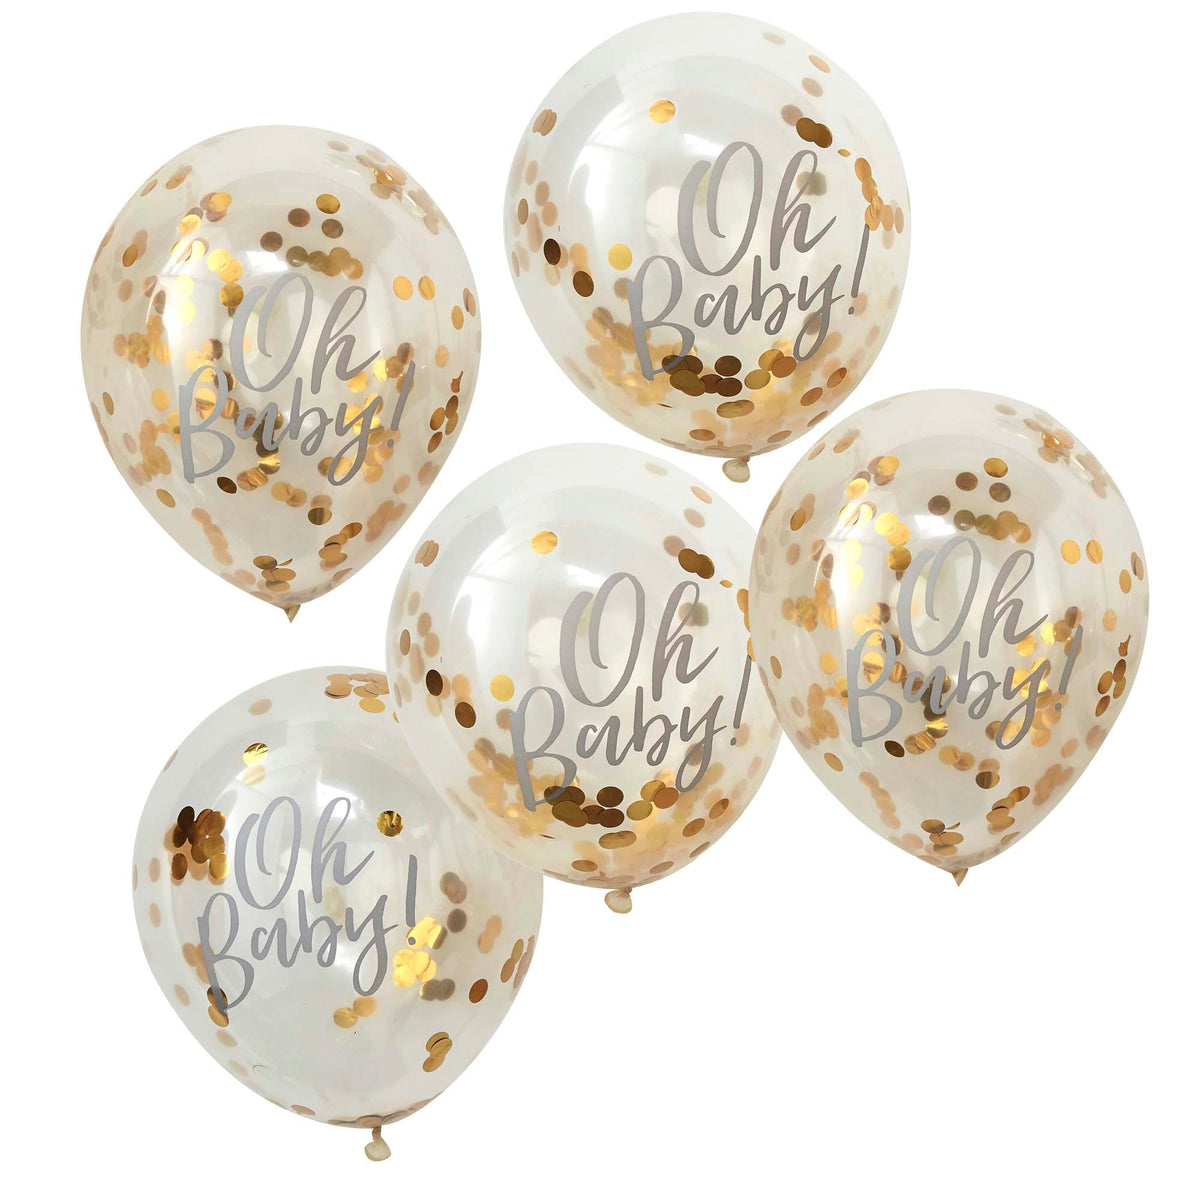 AMSCAN CA Baby Shower Oh Baby Confetti Latex Balloons, Gray, Clear and Brown, 12 Inches, 5 Count